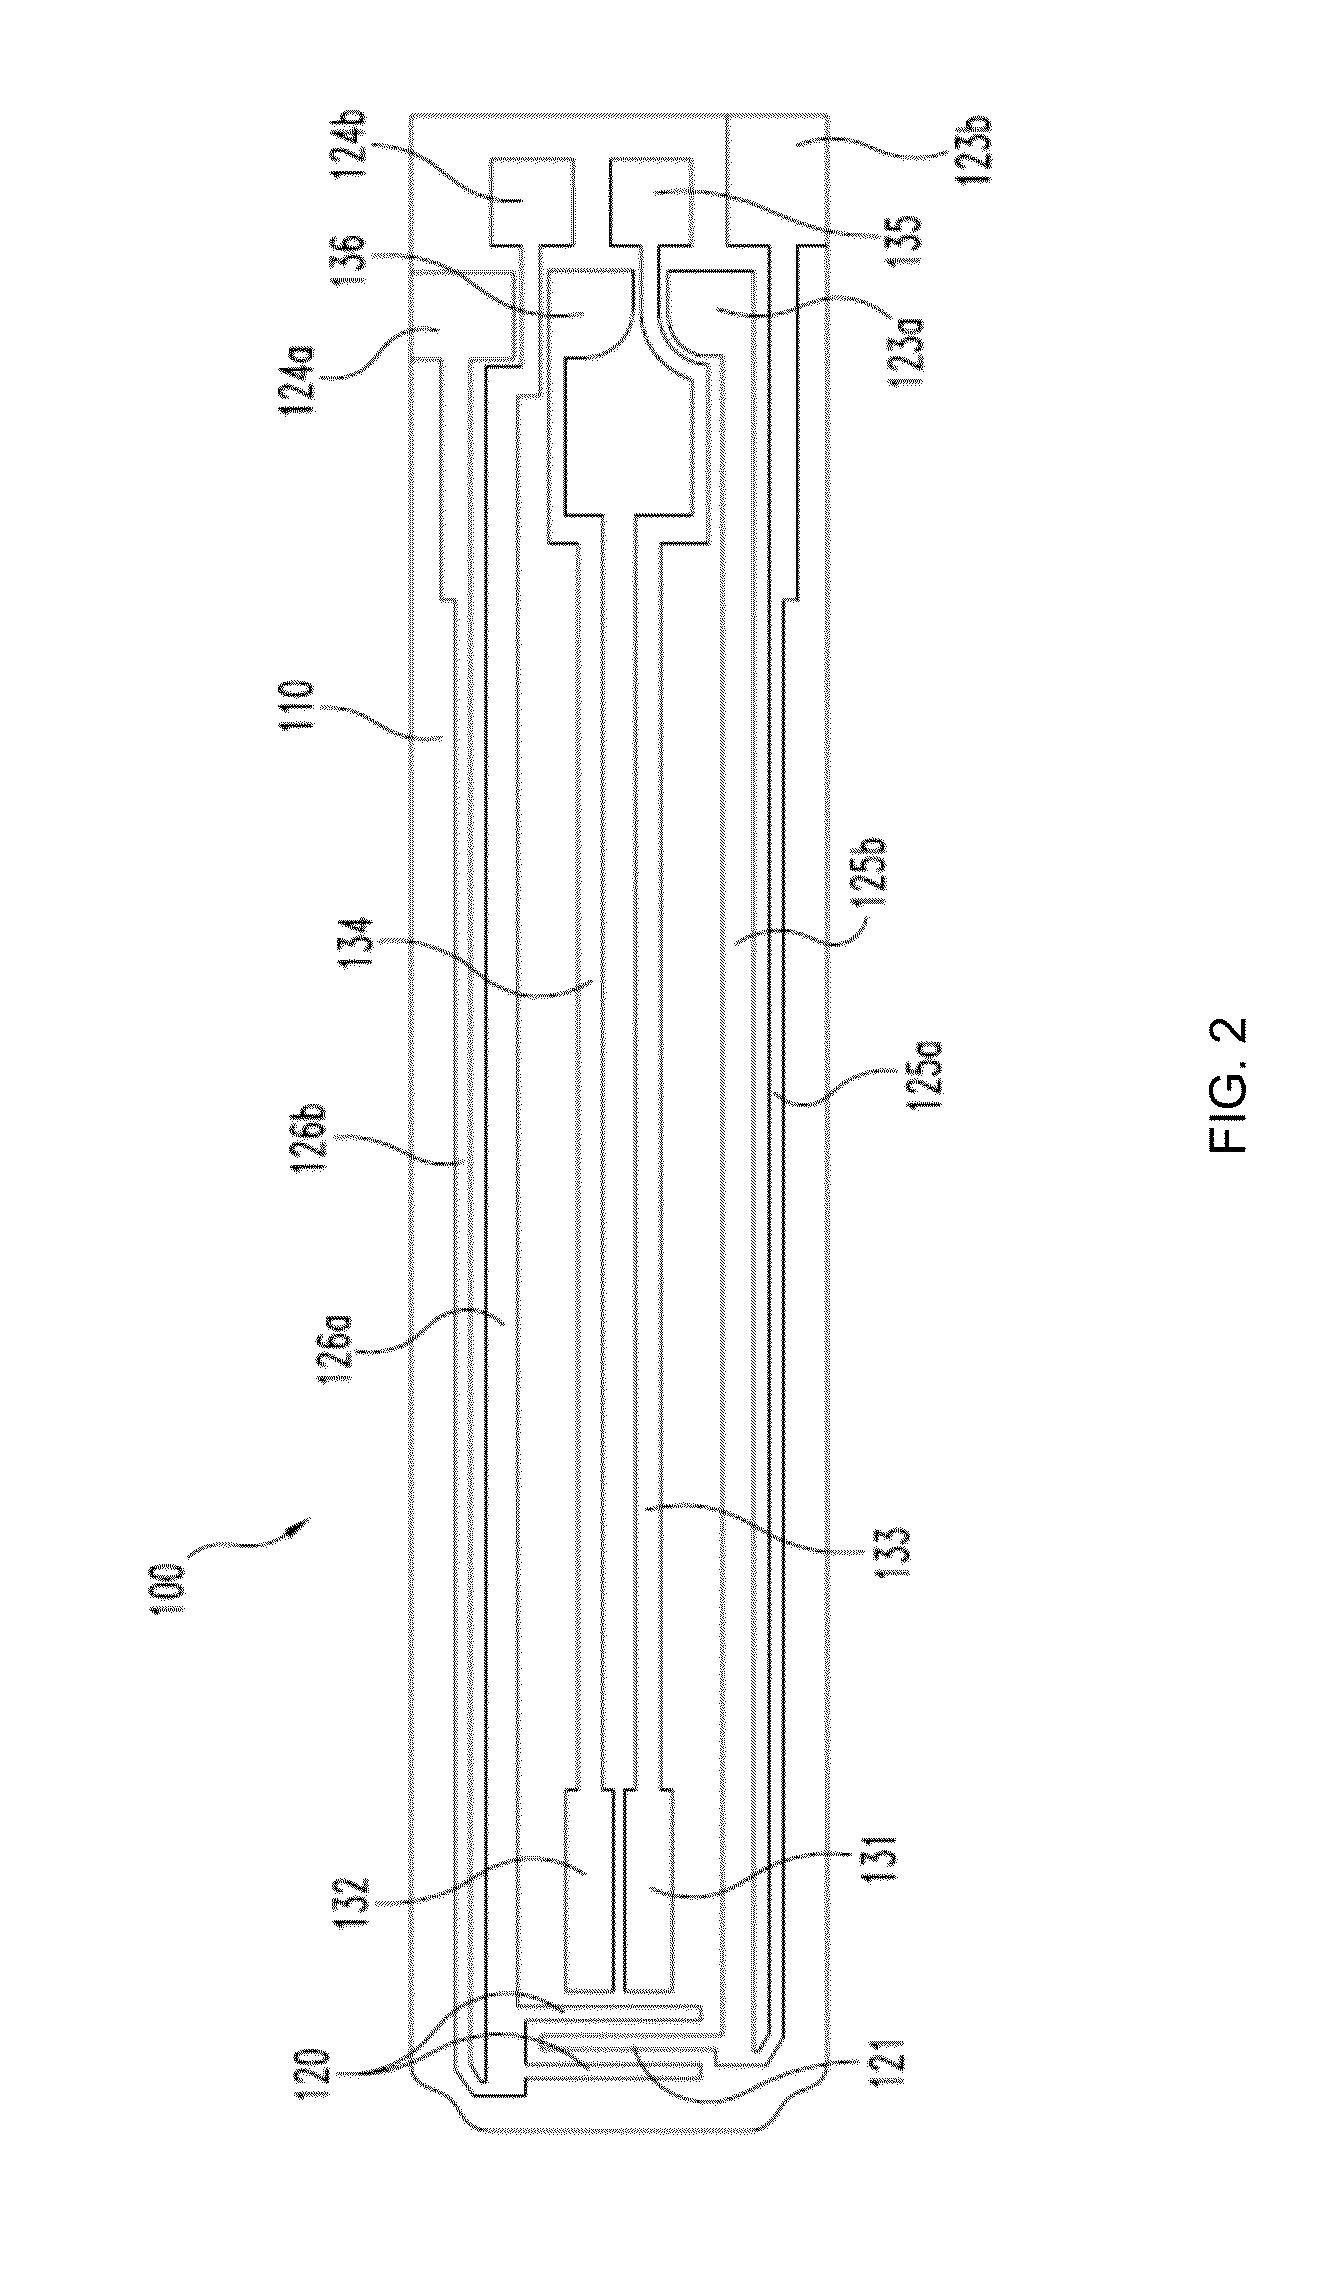 Methods of scaling data used to construct biosensor algorithms as well as devices, apparatuses and systems incorporating the same